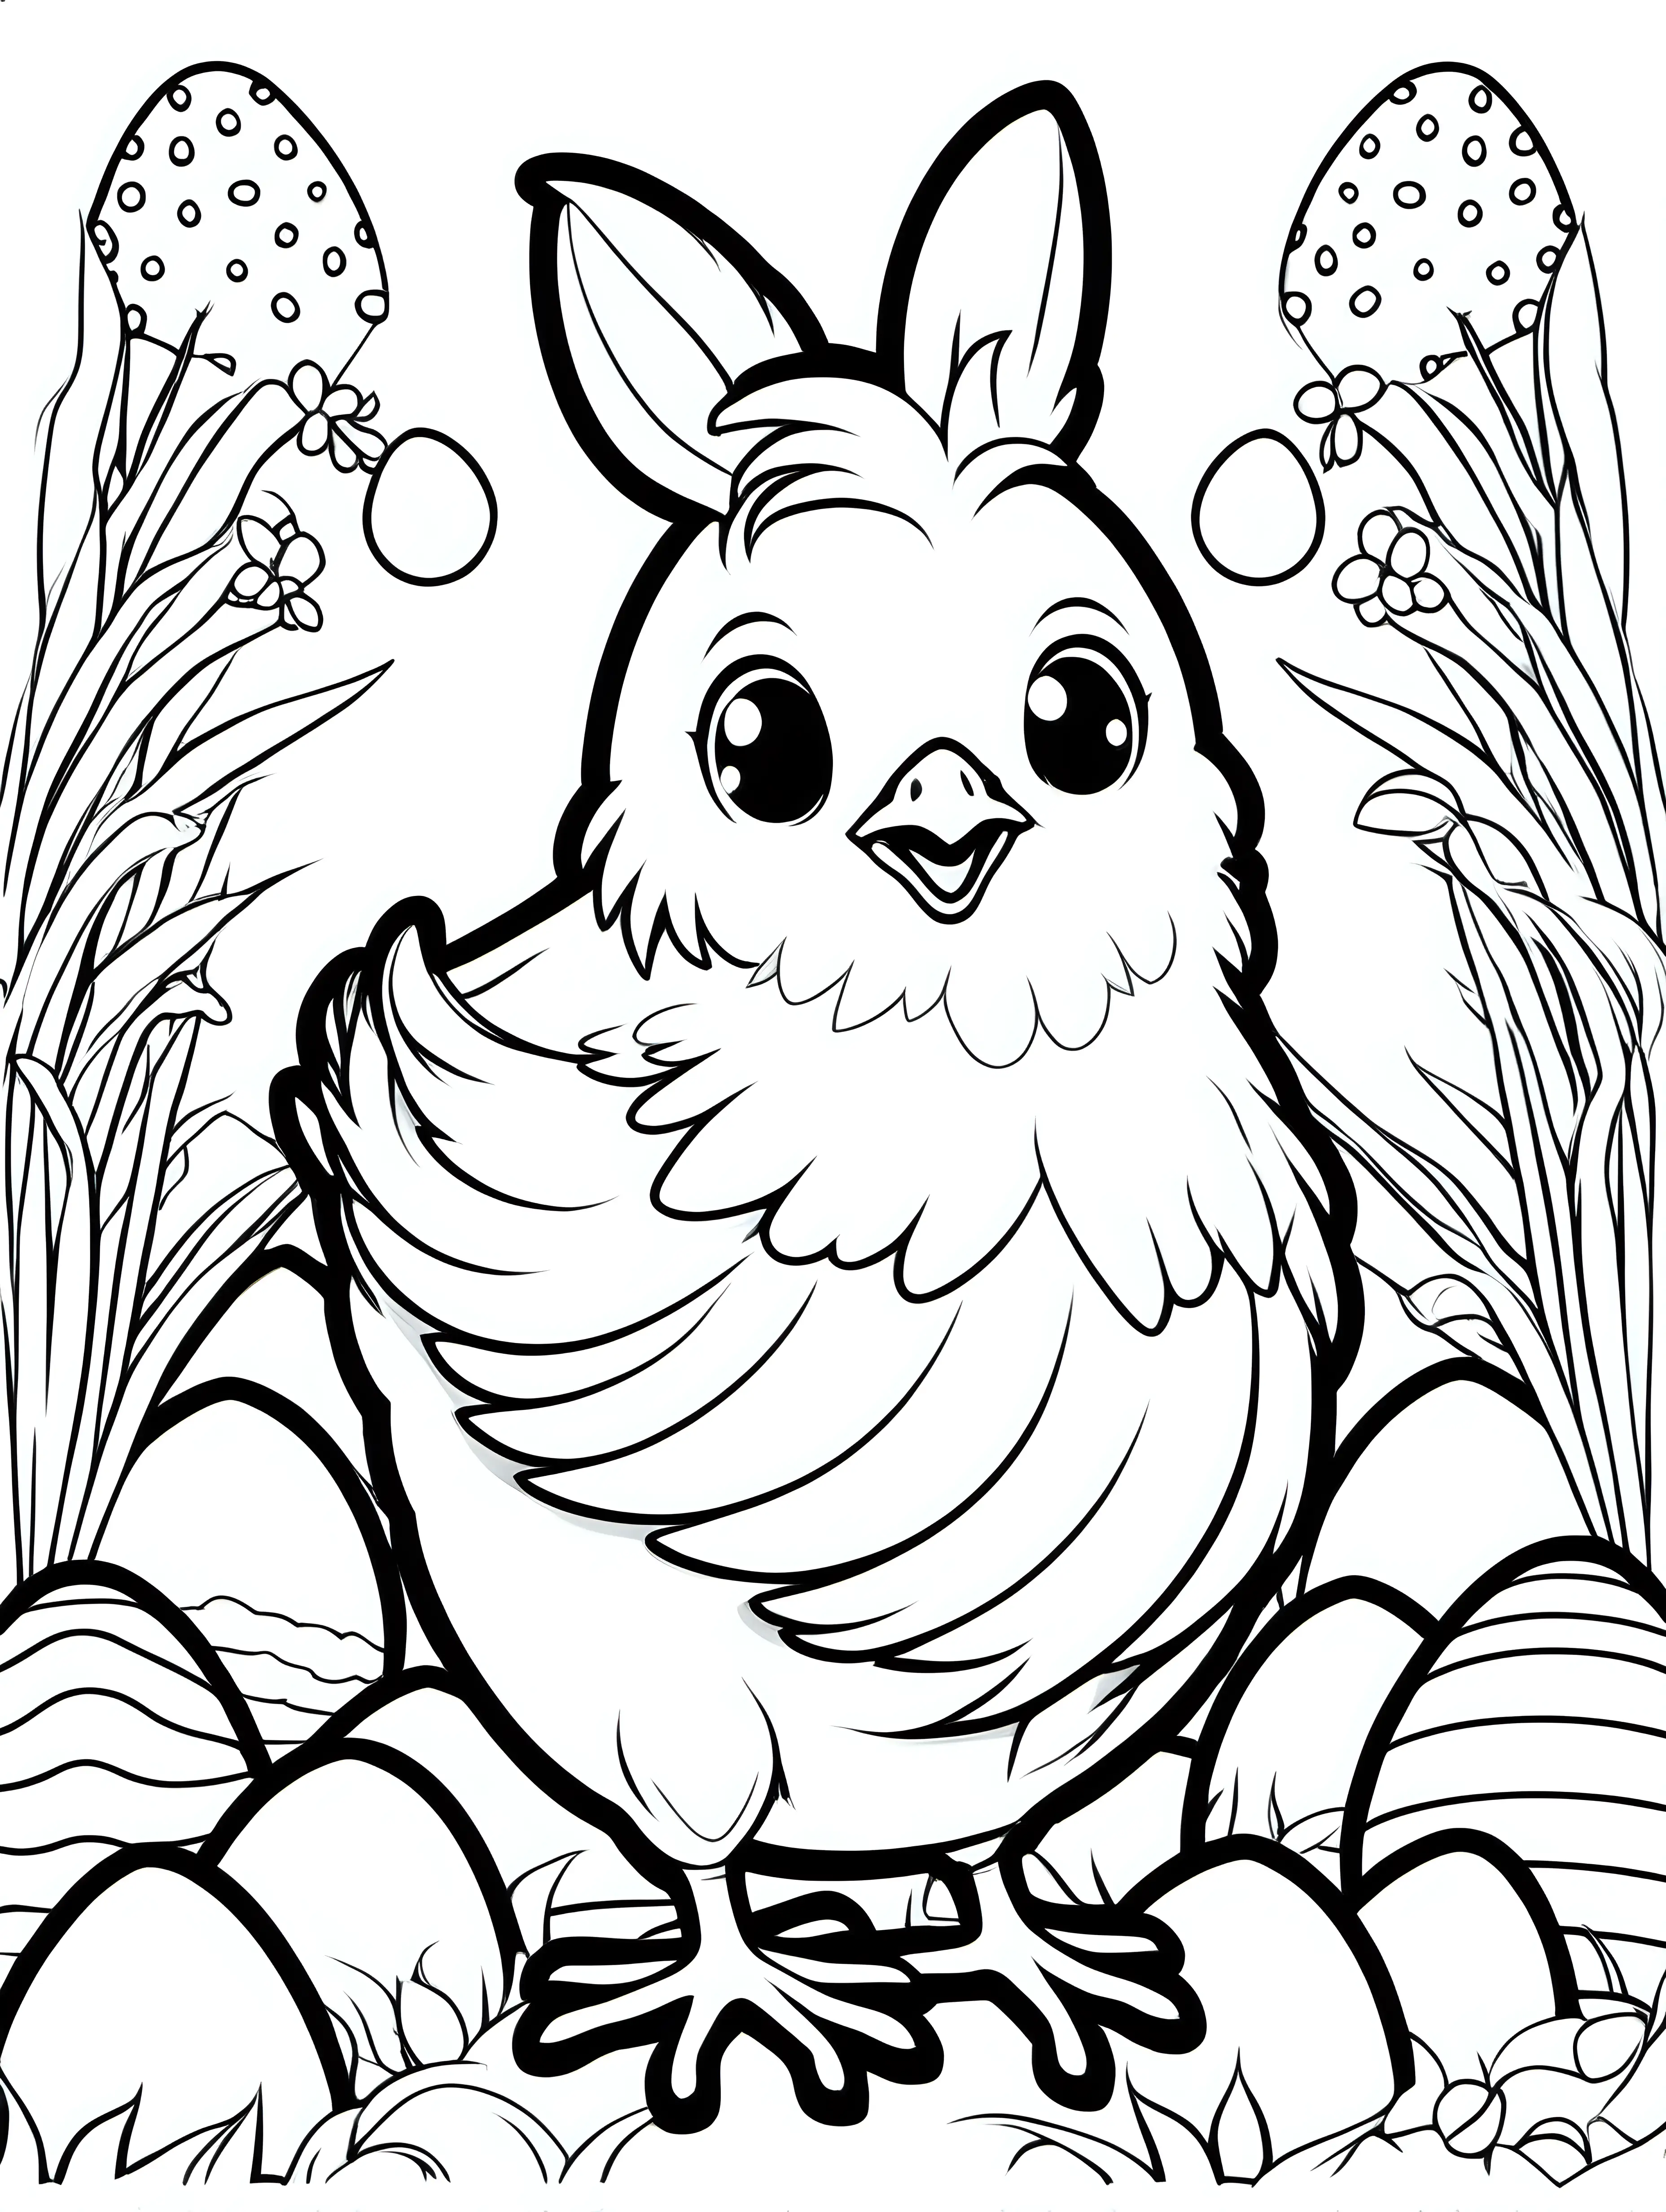 Cute Easter Chick for Kids Coloring Book Cover Simple and Colorful Vector Illustration